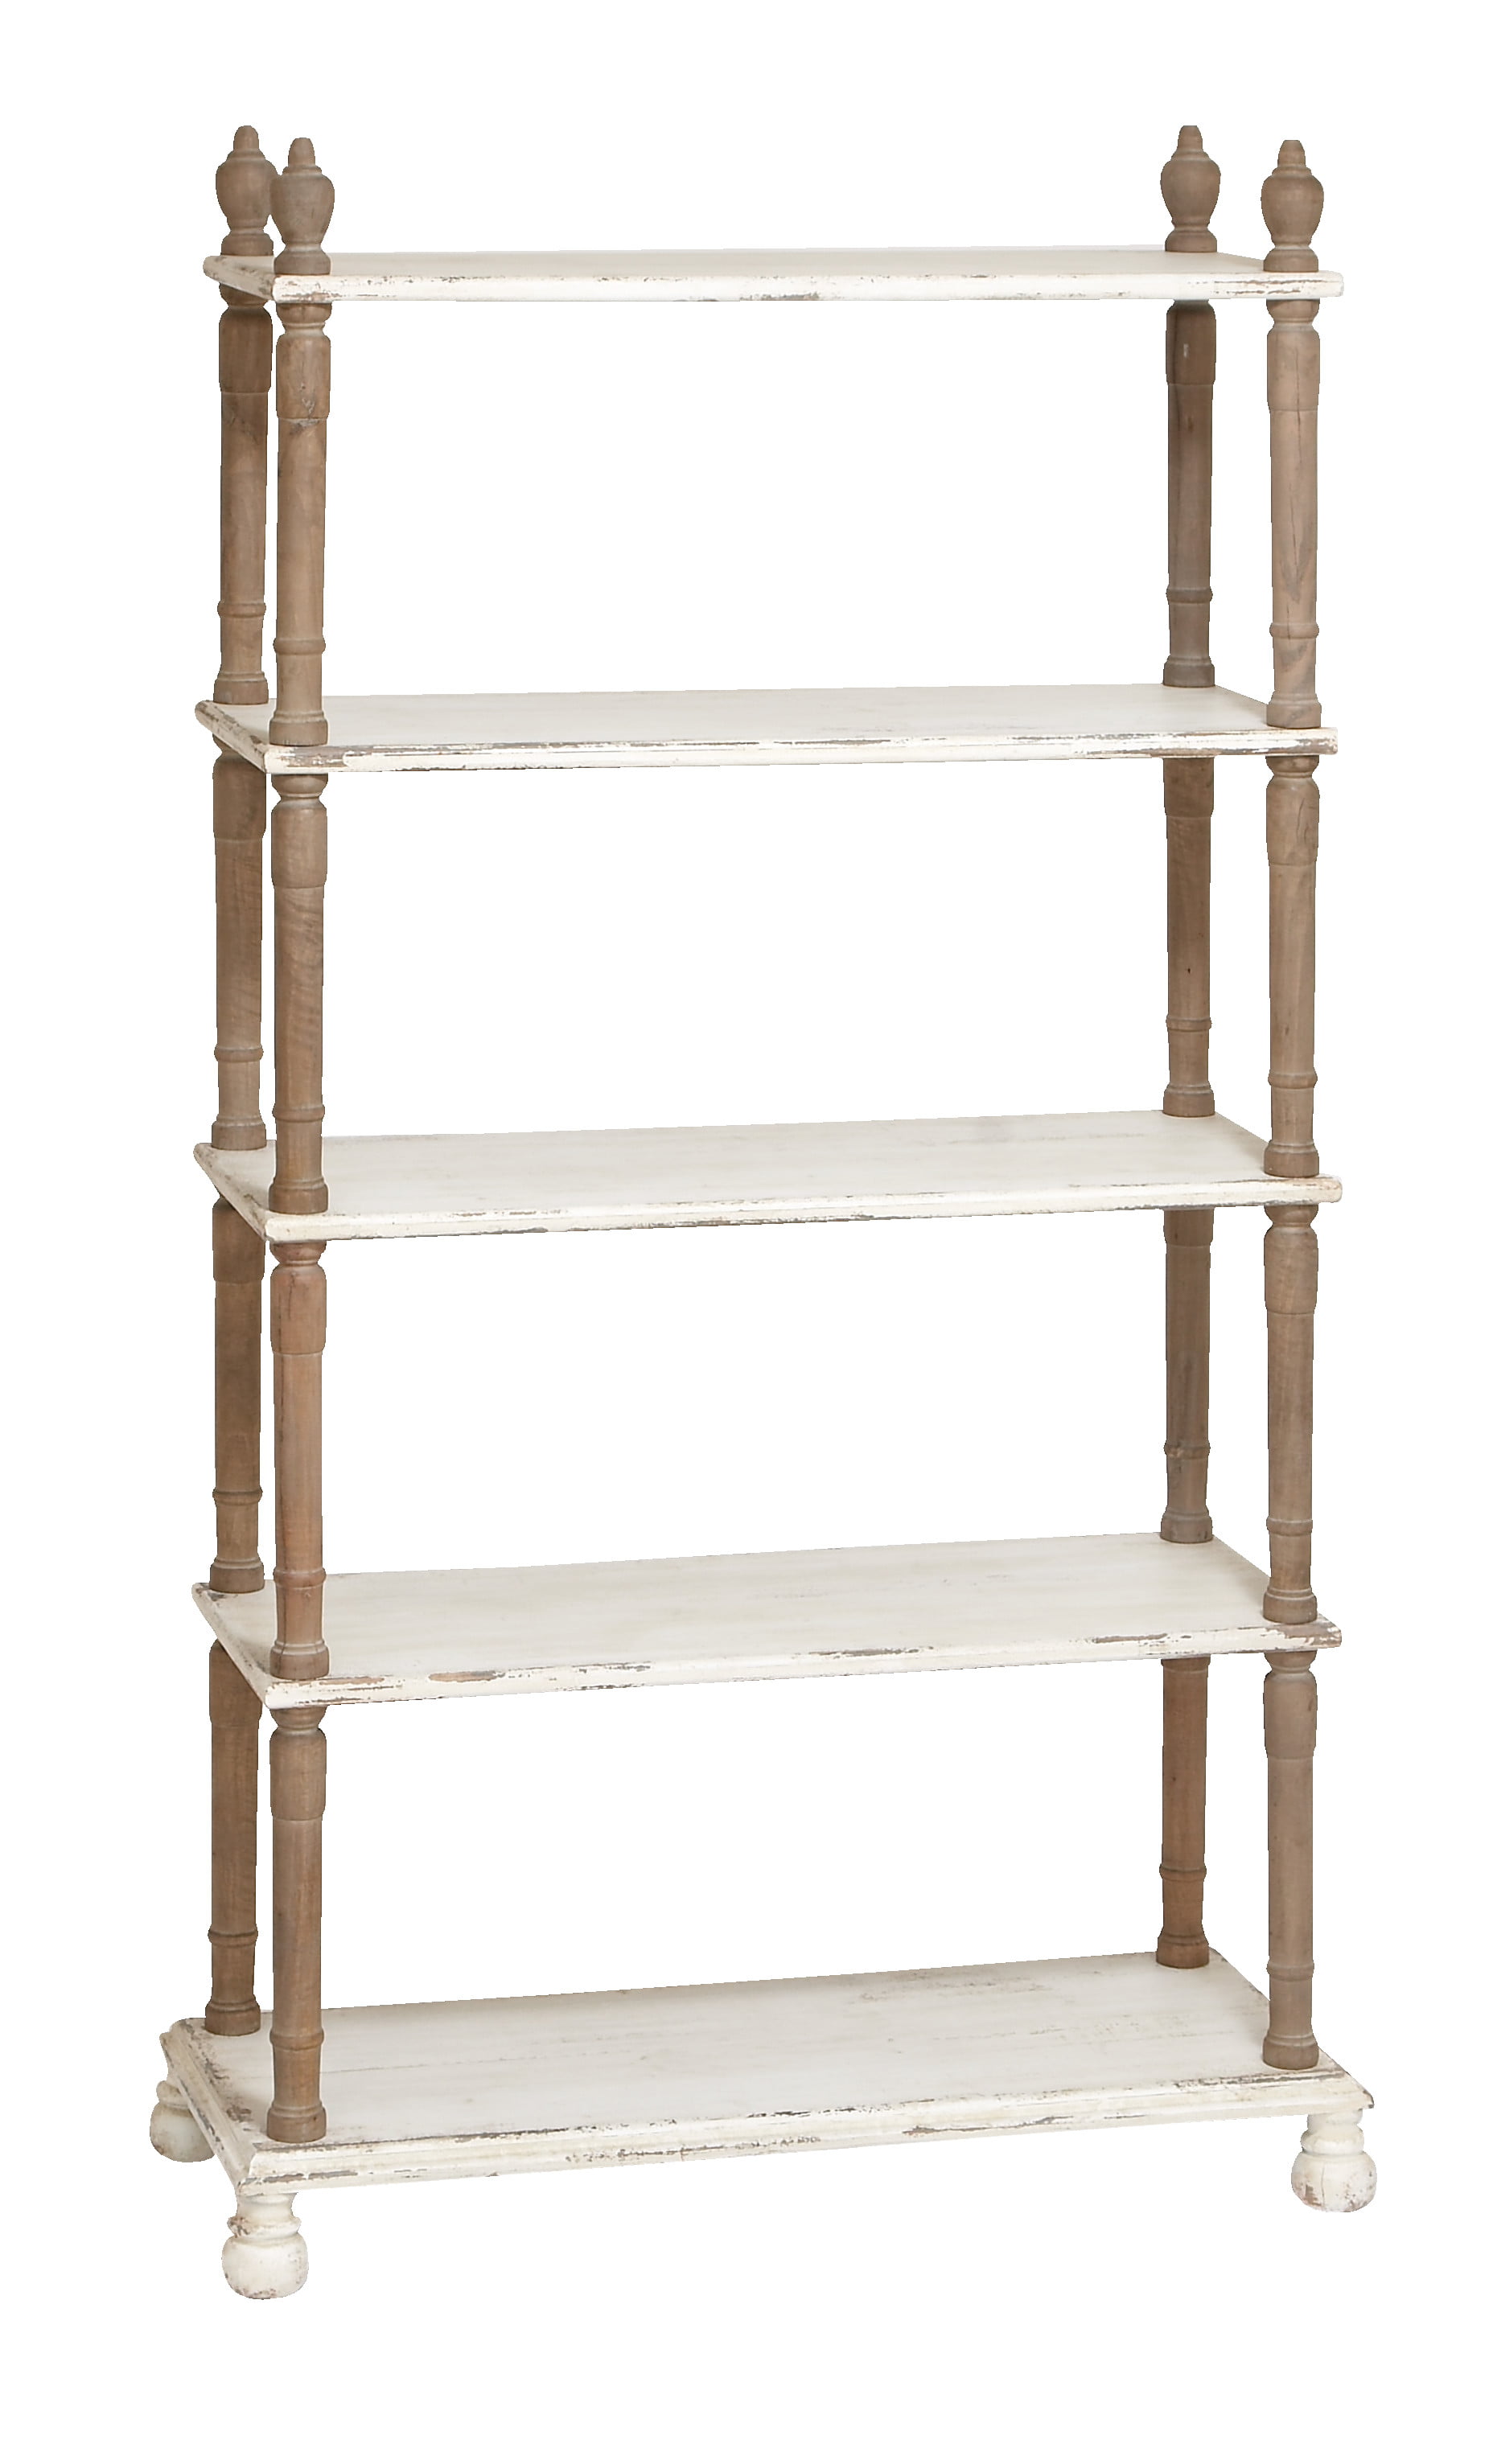 Decmode Solid Wood Farmhouse Shelving, Distressed White Shelving Unit